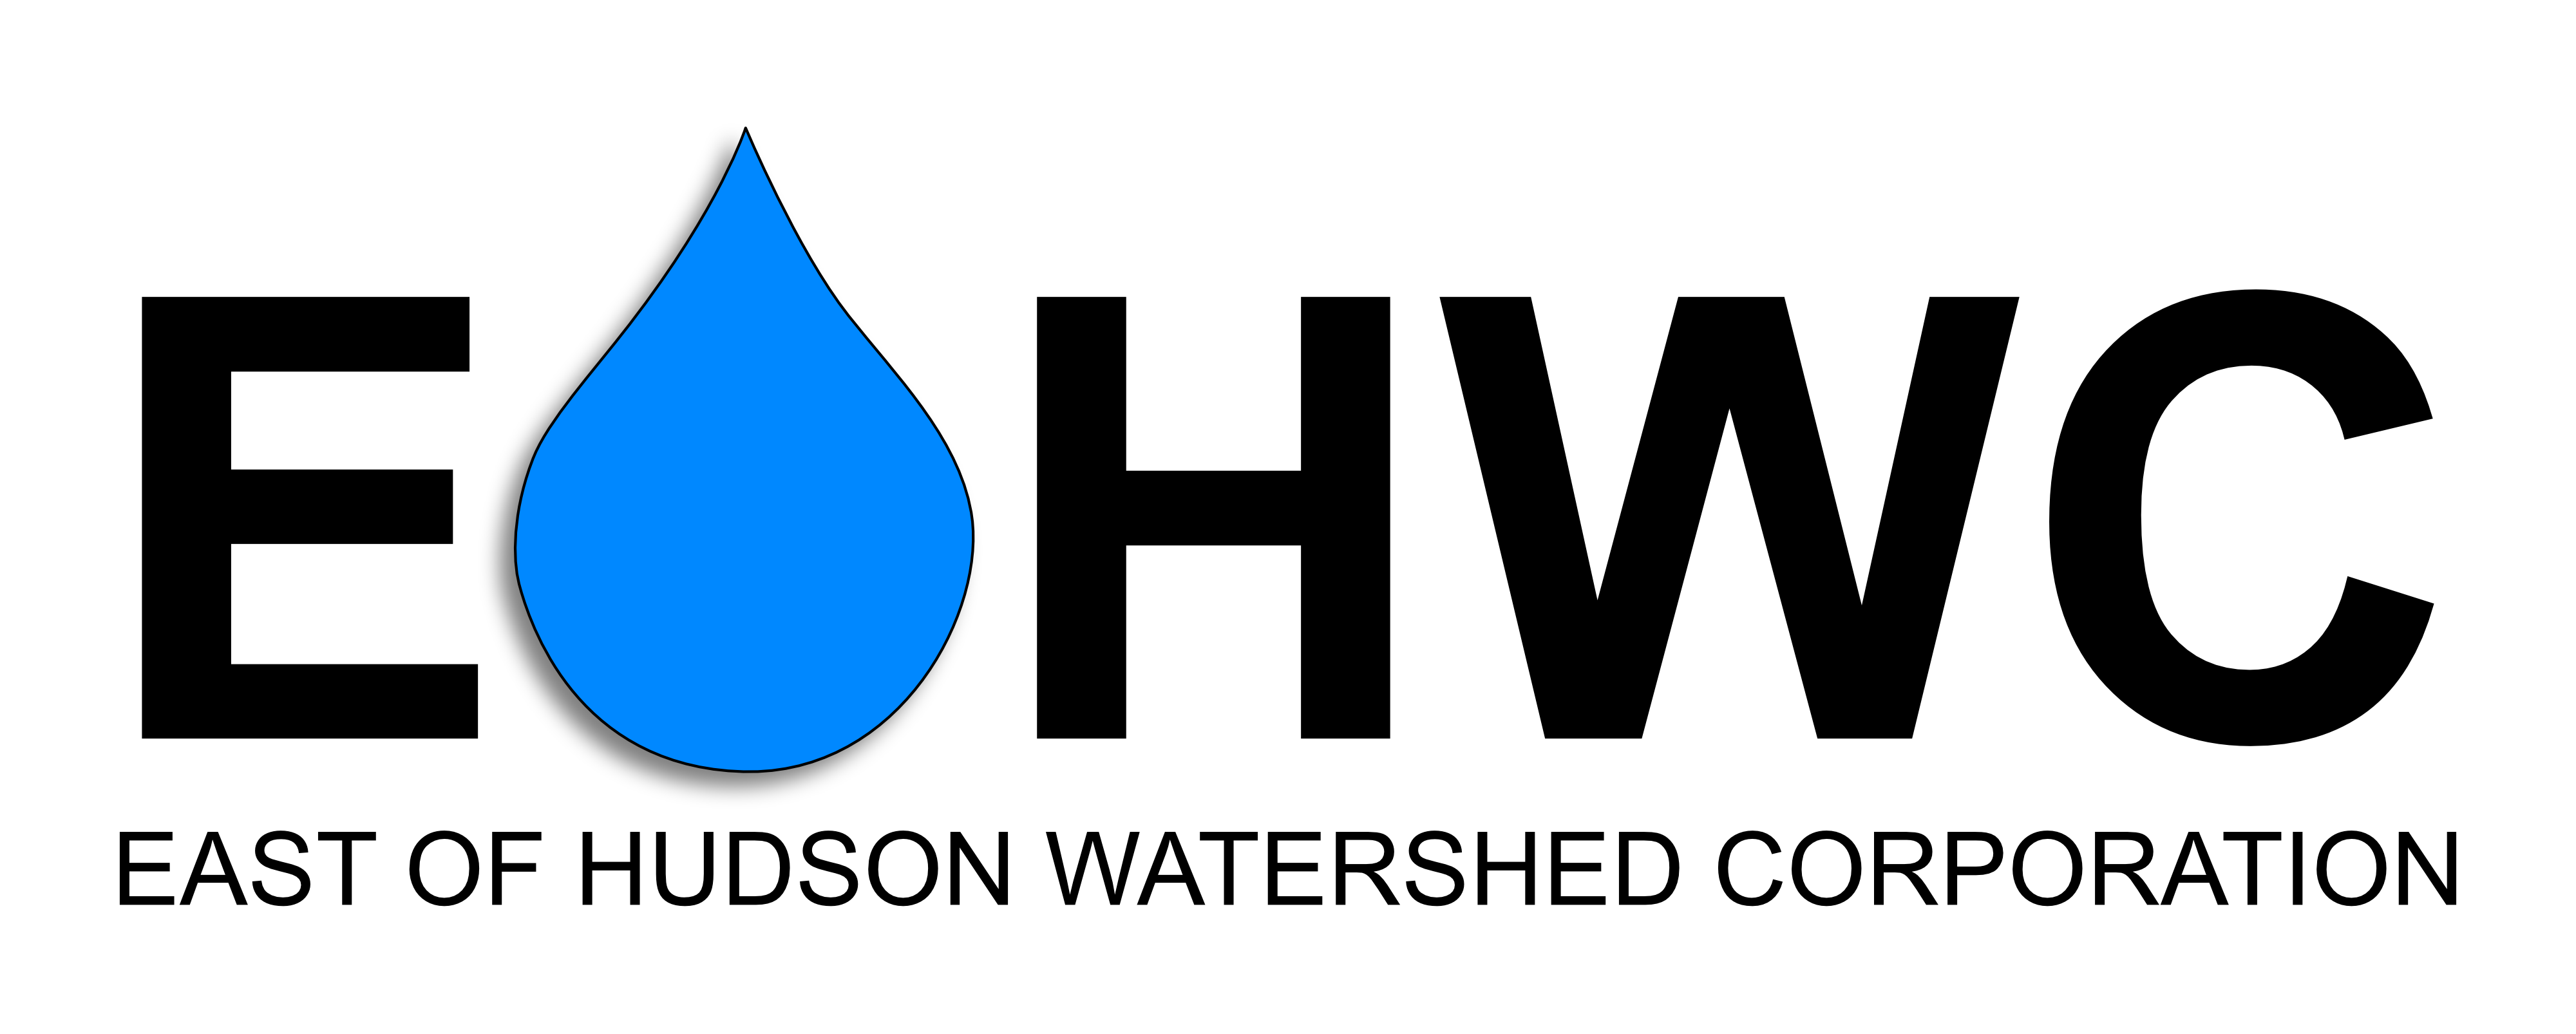 East of Hudson Watershed Corporation